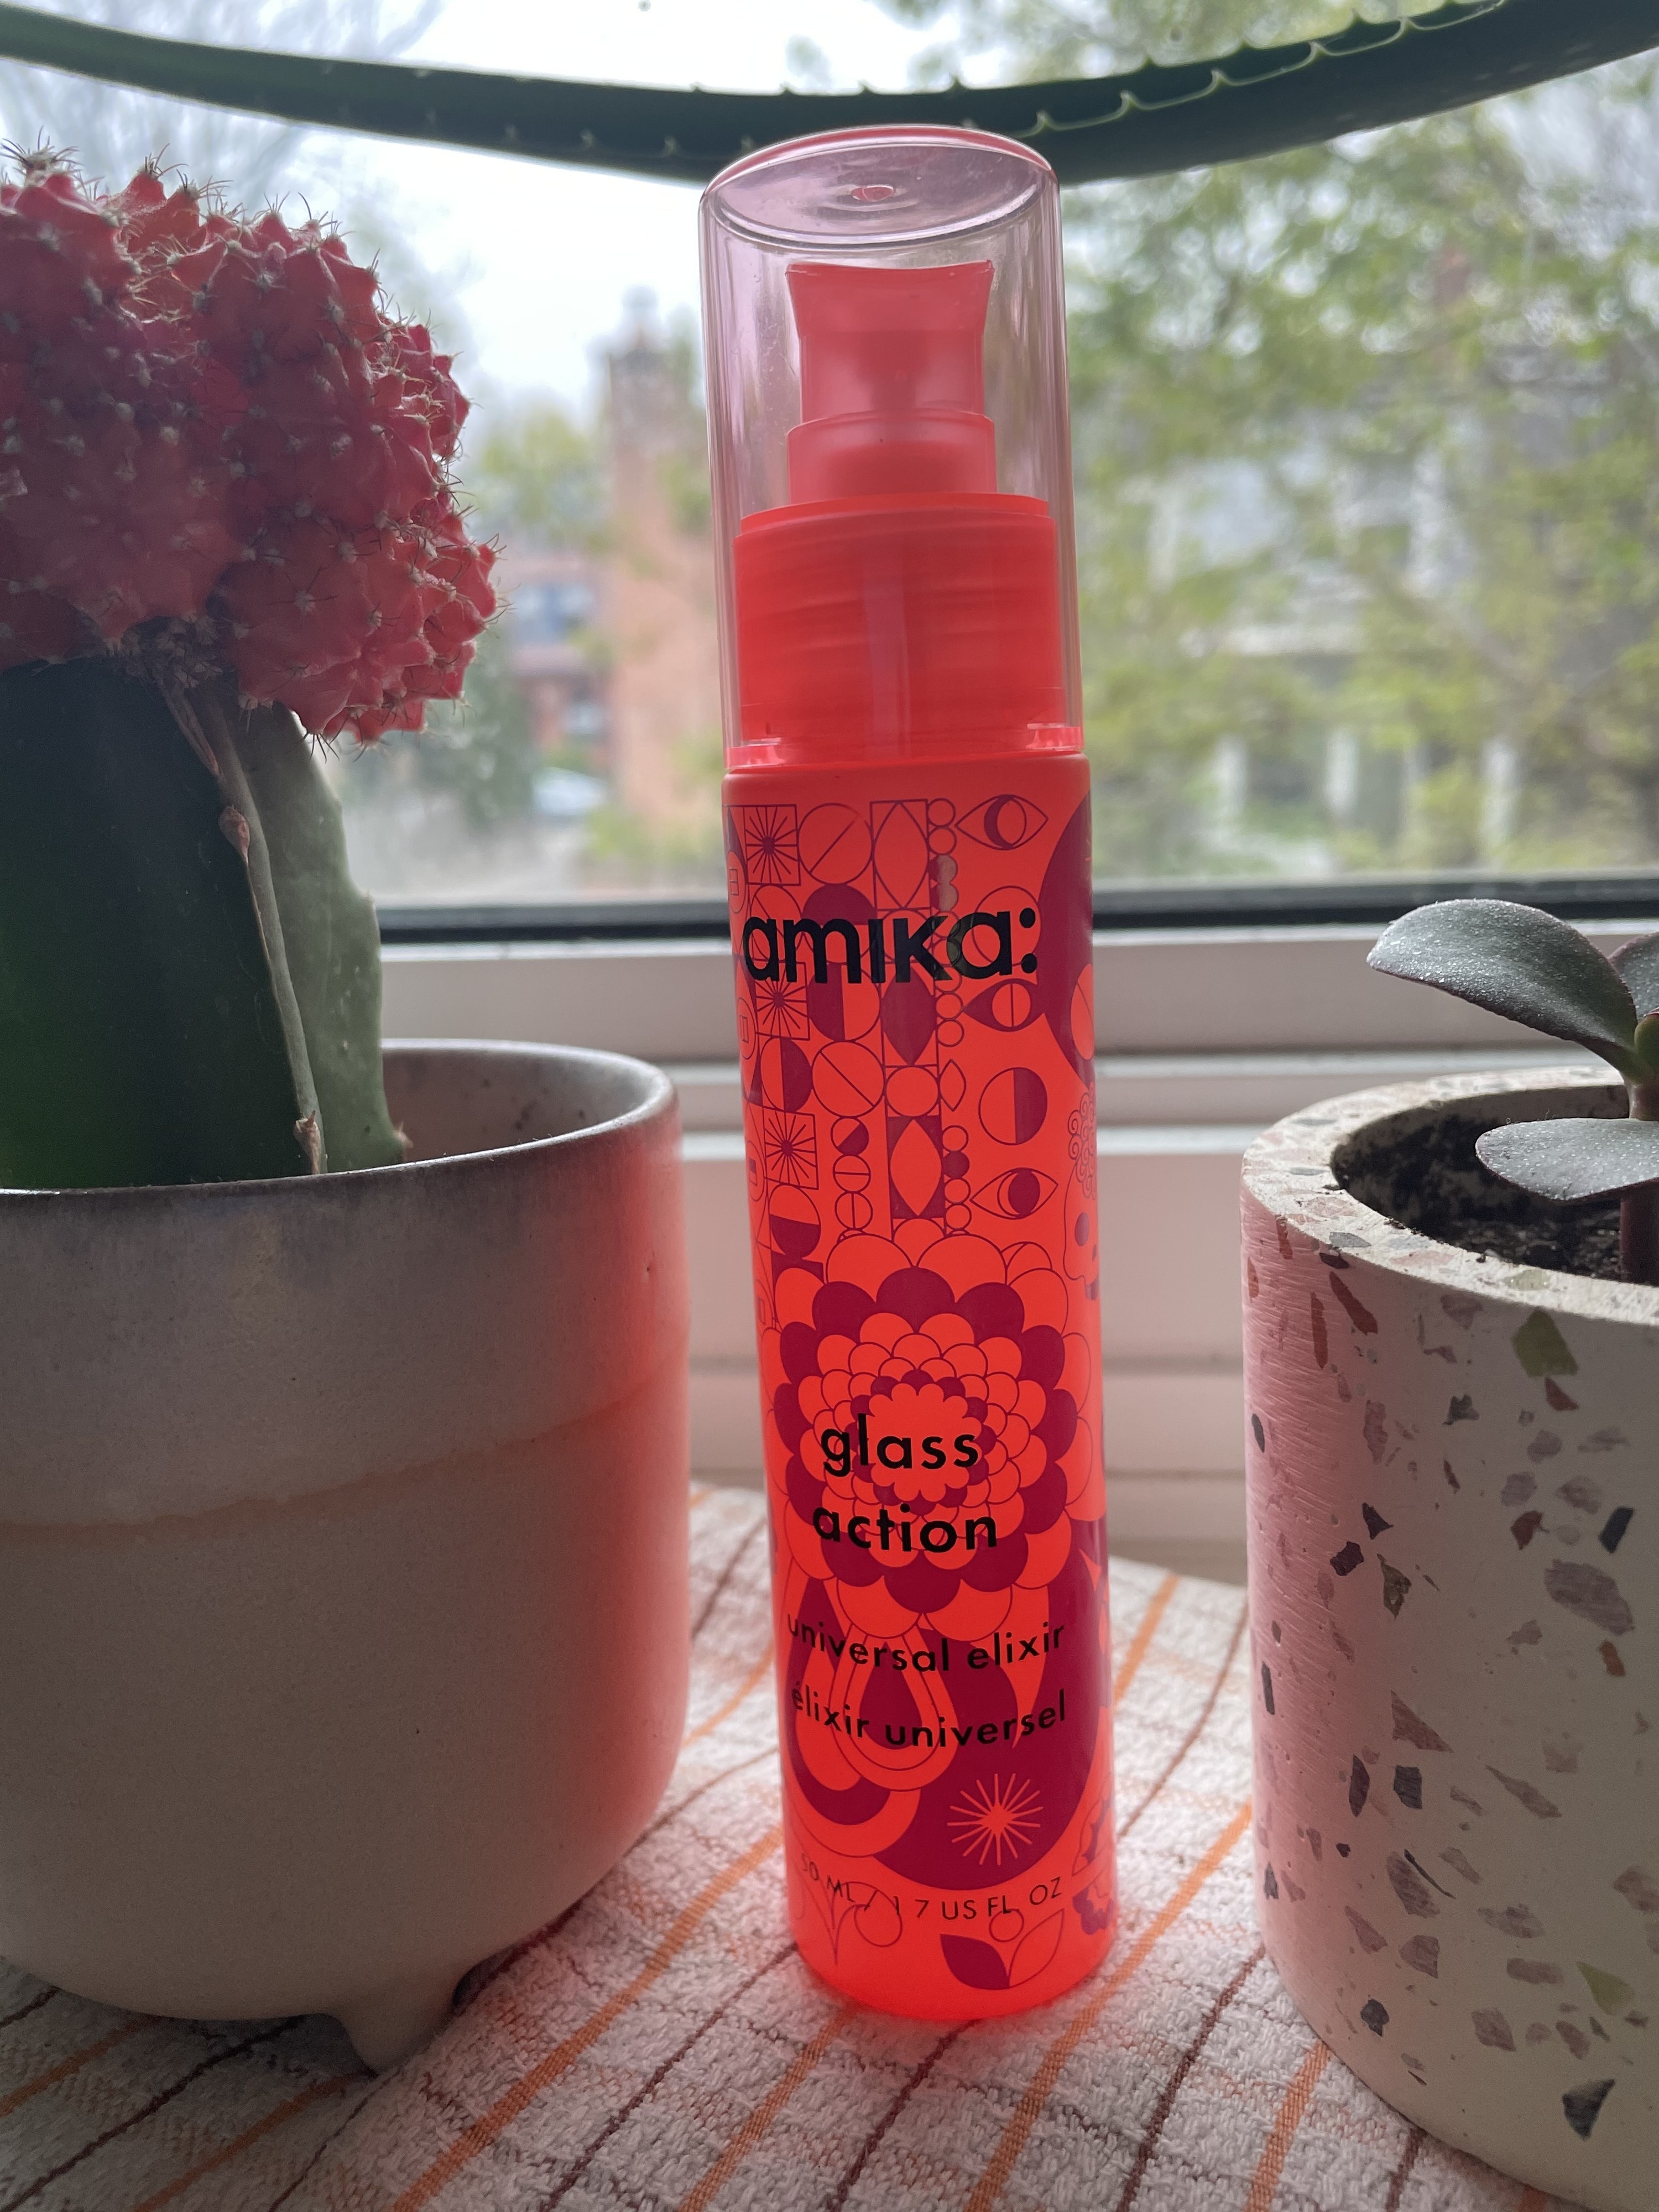 A bottle of Amika&#x27;s glass action universal elixir 